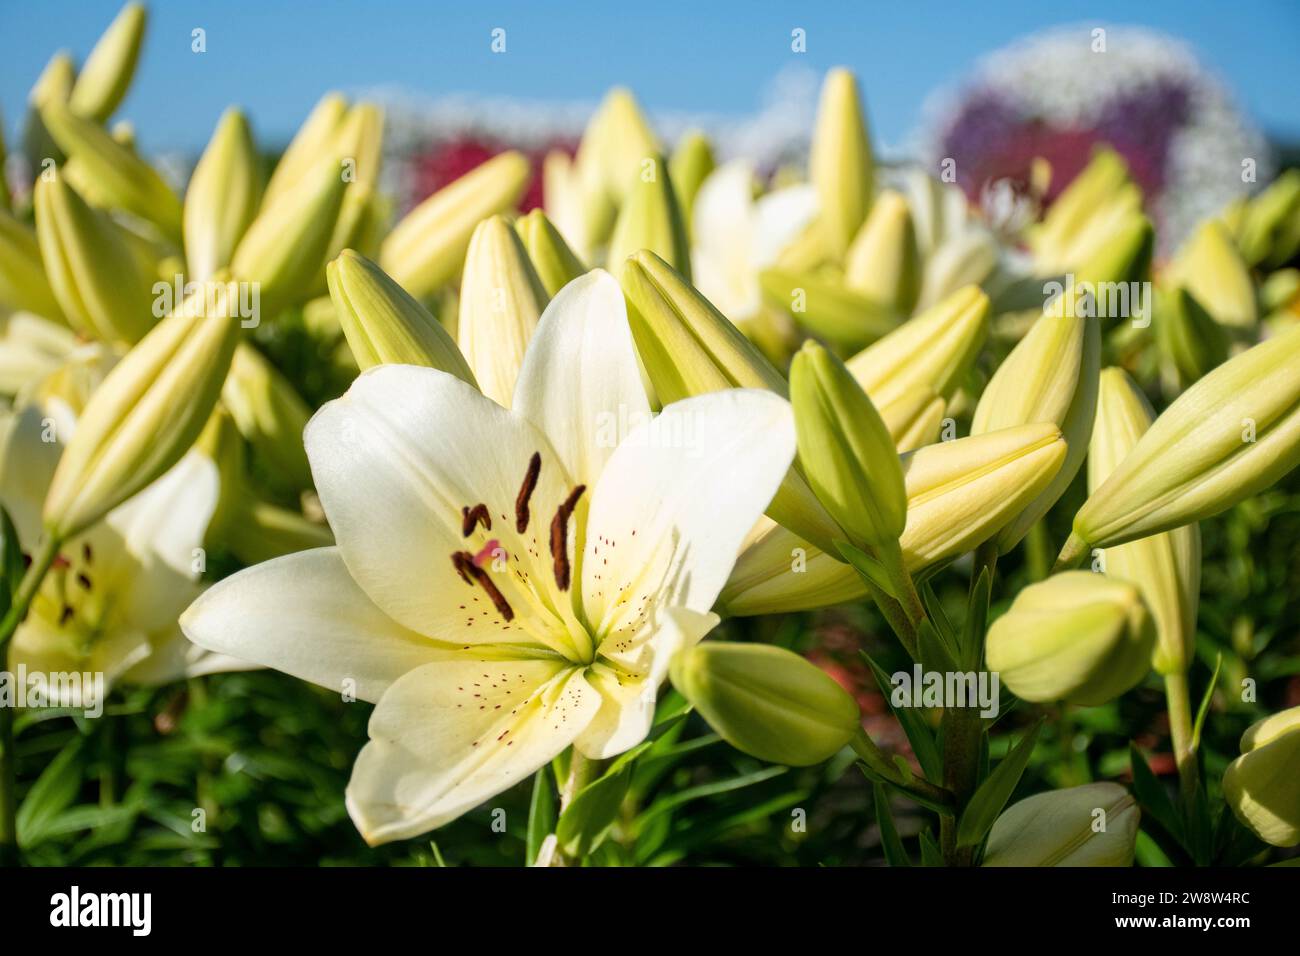 White flower blooming among flower buds Stock Photo